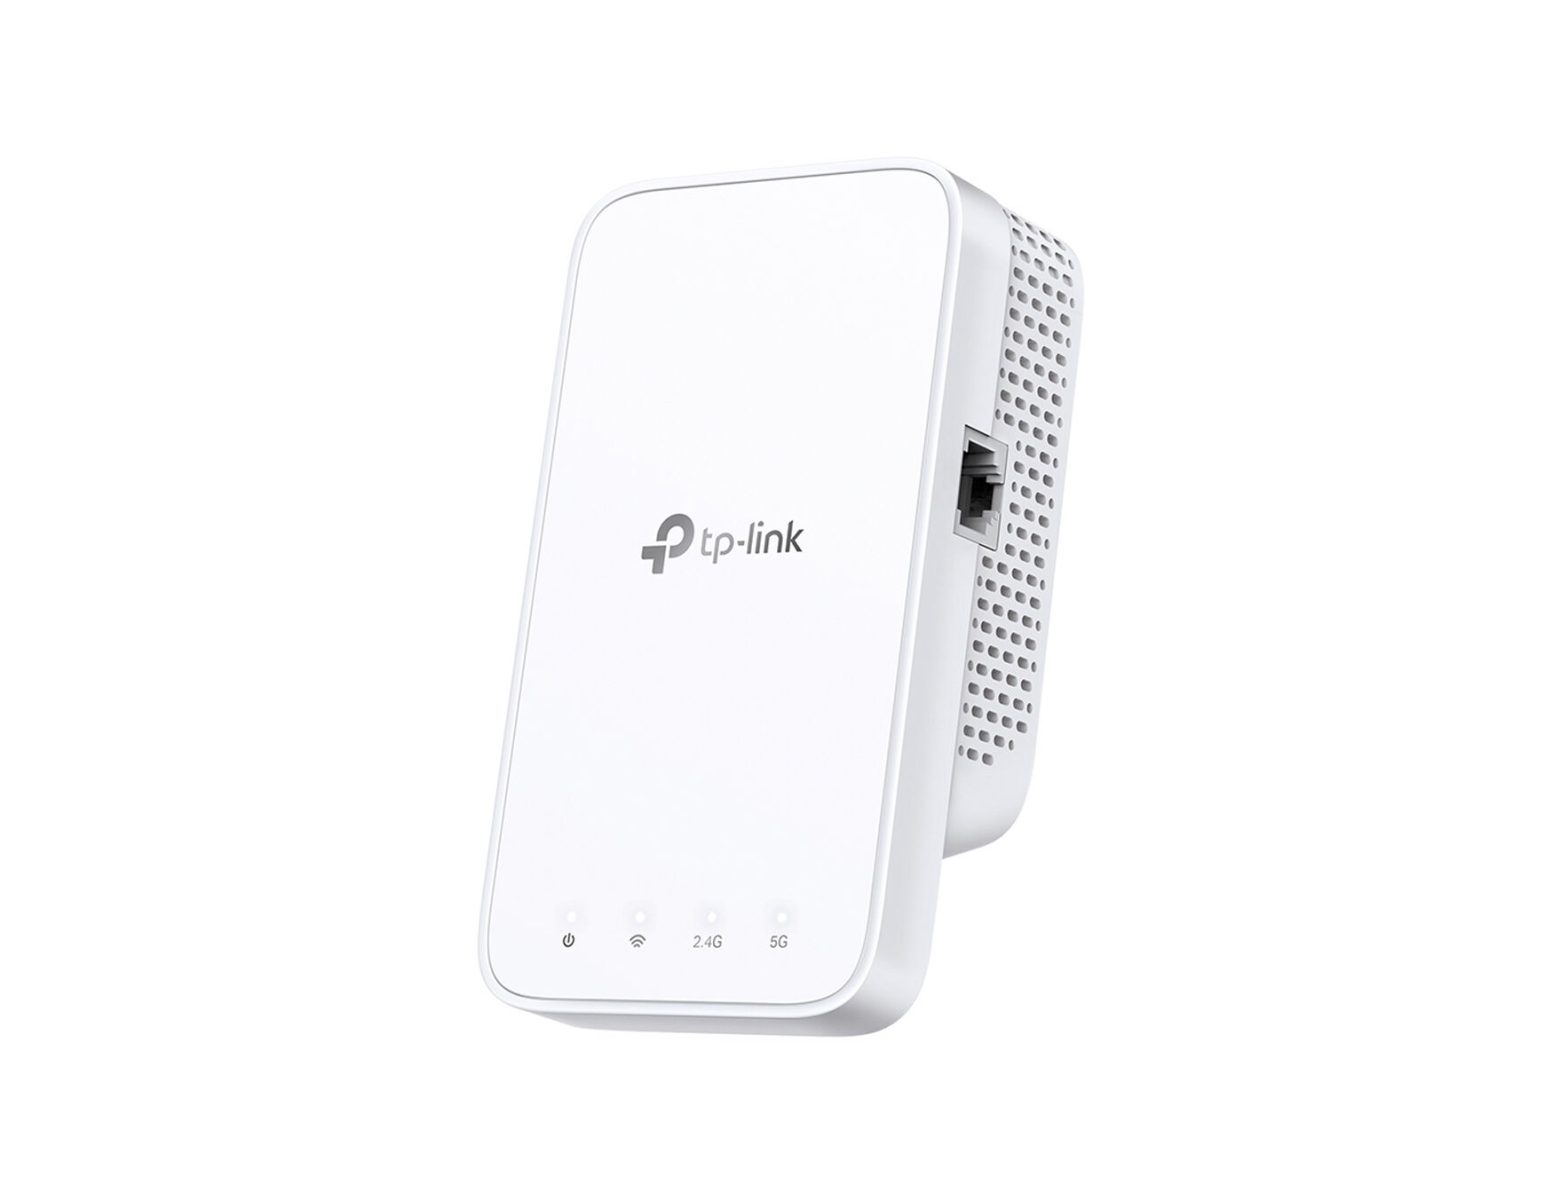 tp-link RE230 AC750 Wi-Fi Range Extender Installation Guide